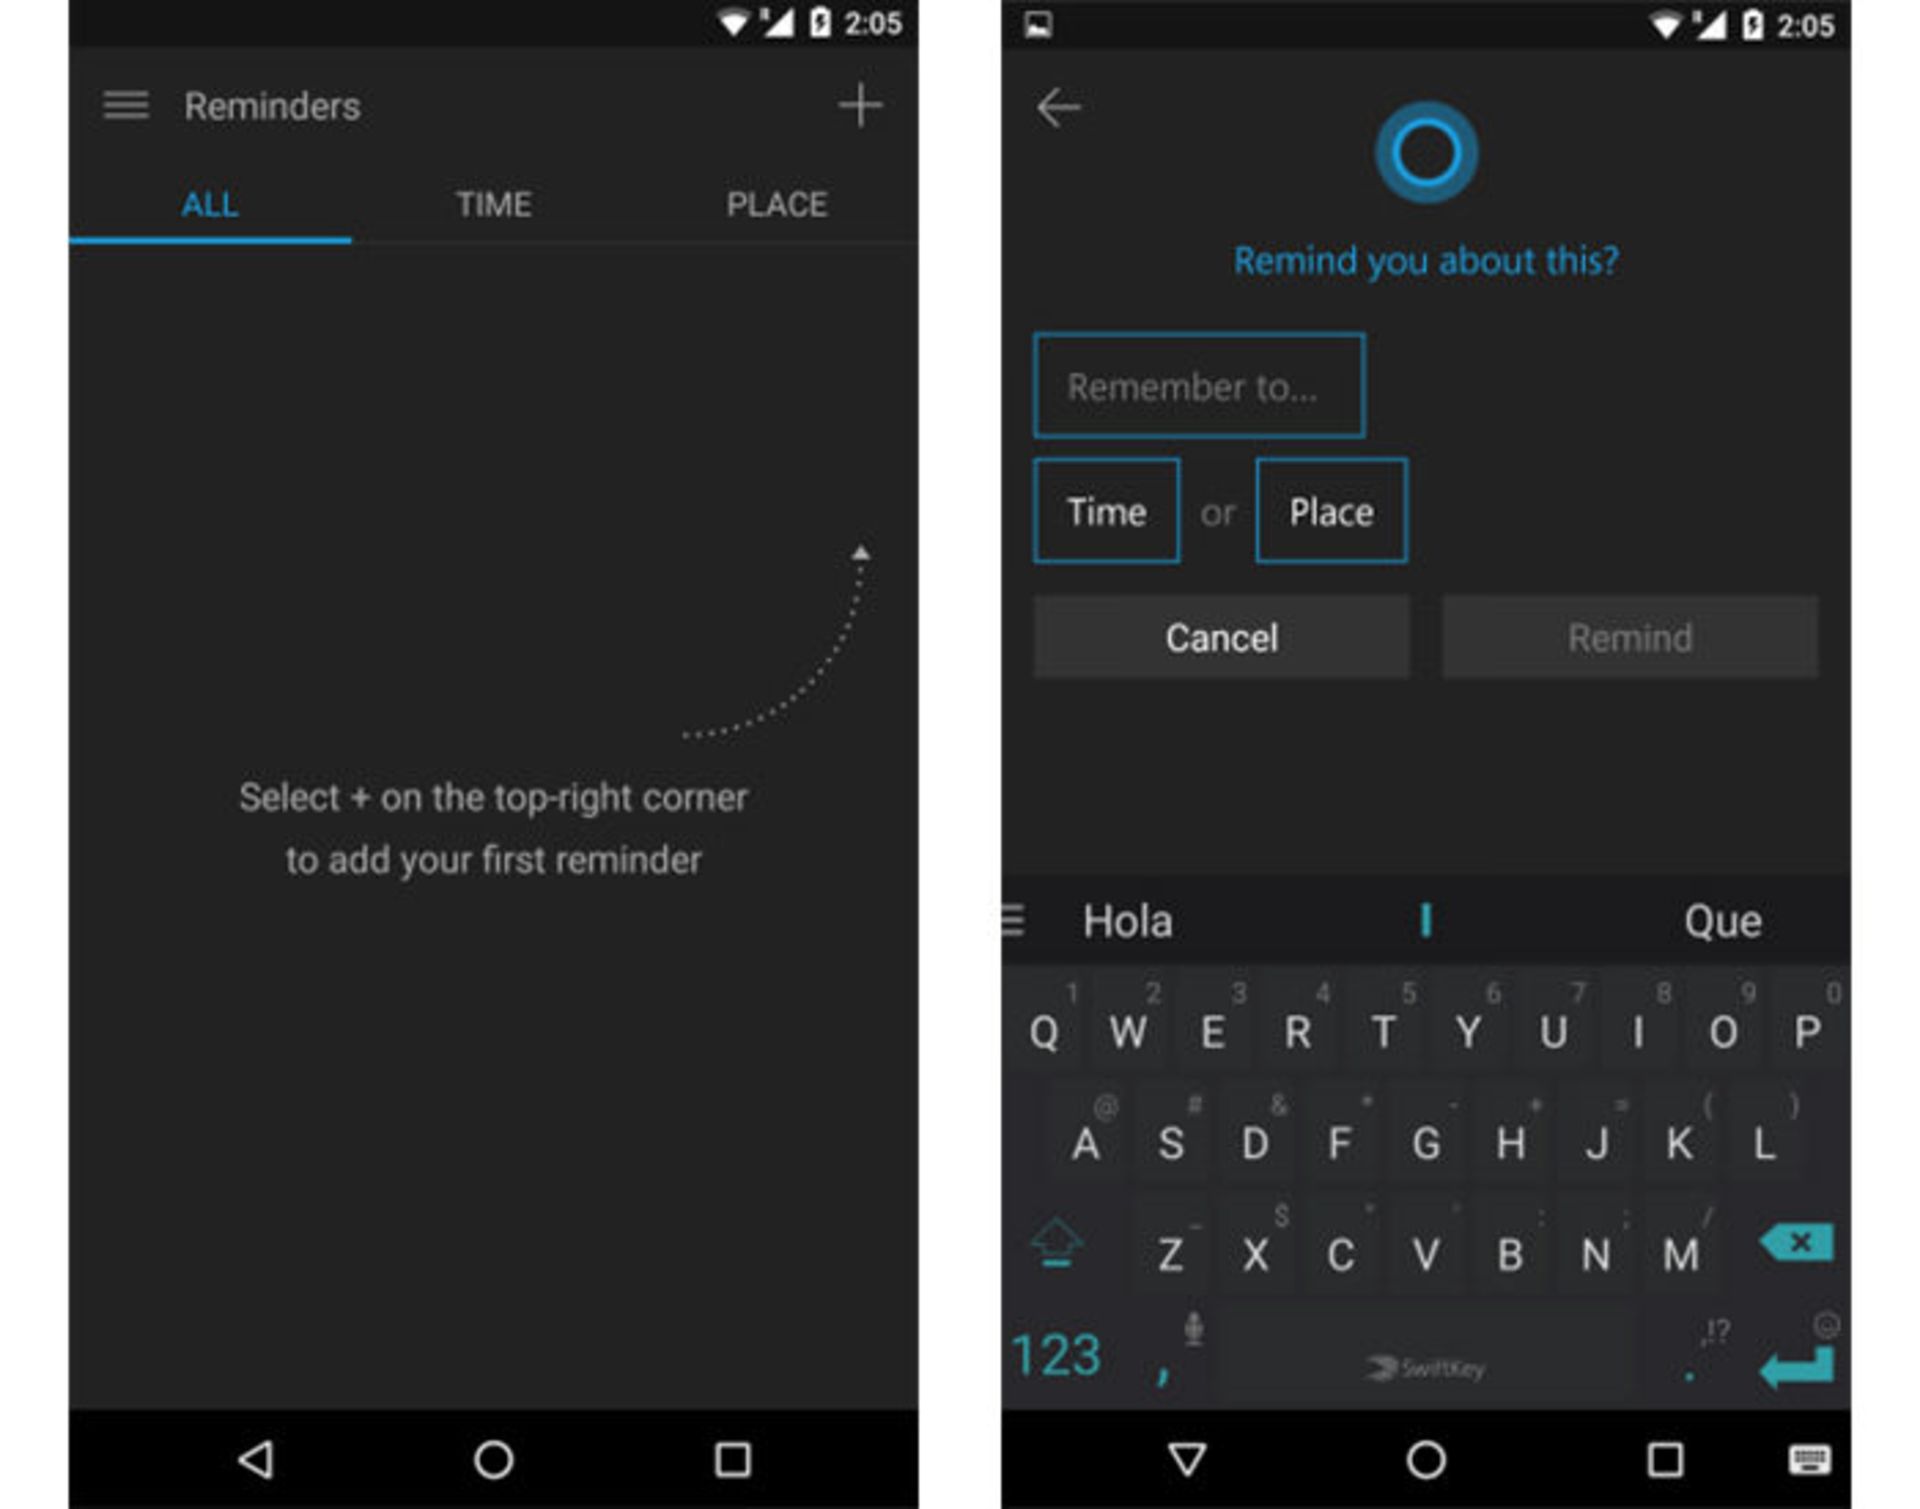 cortana for android 5 6a791